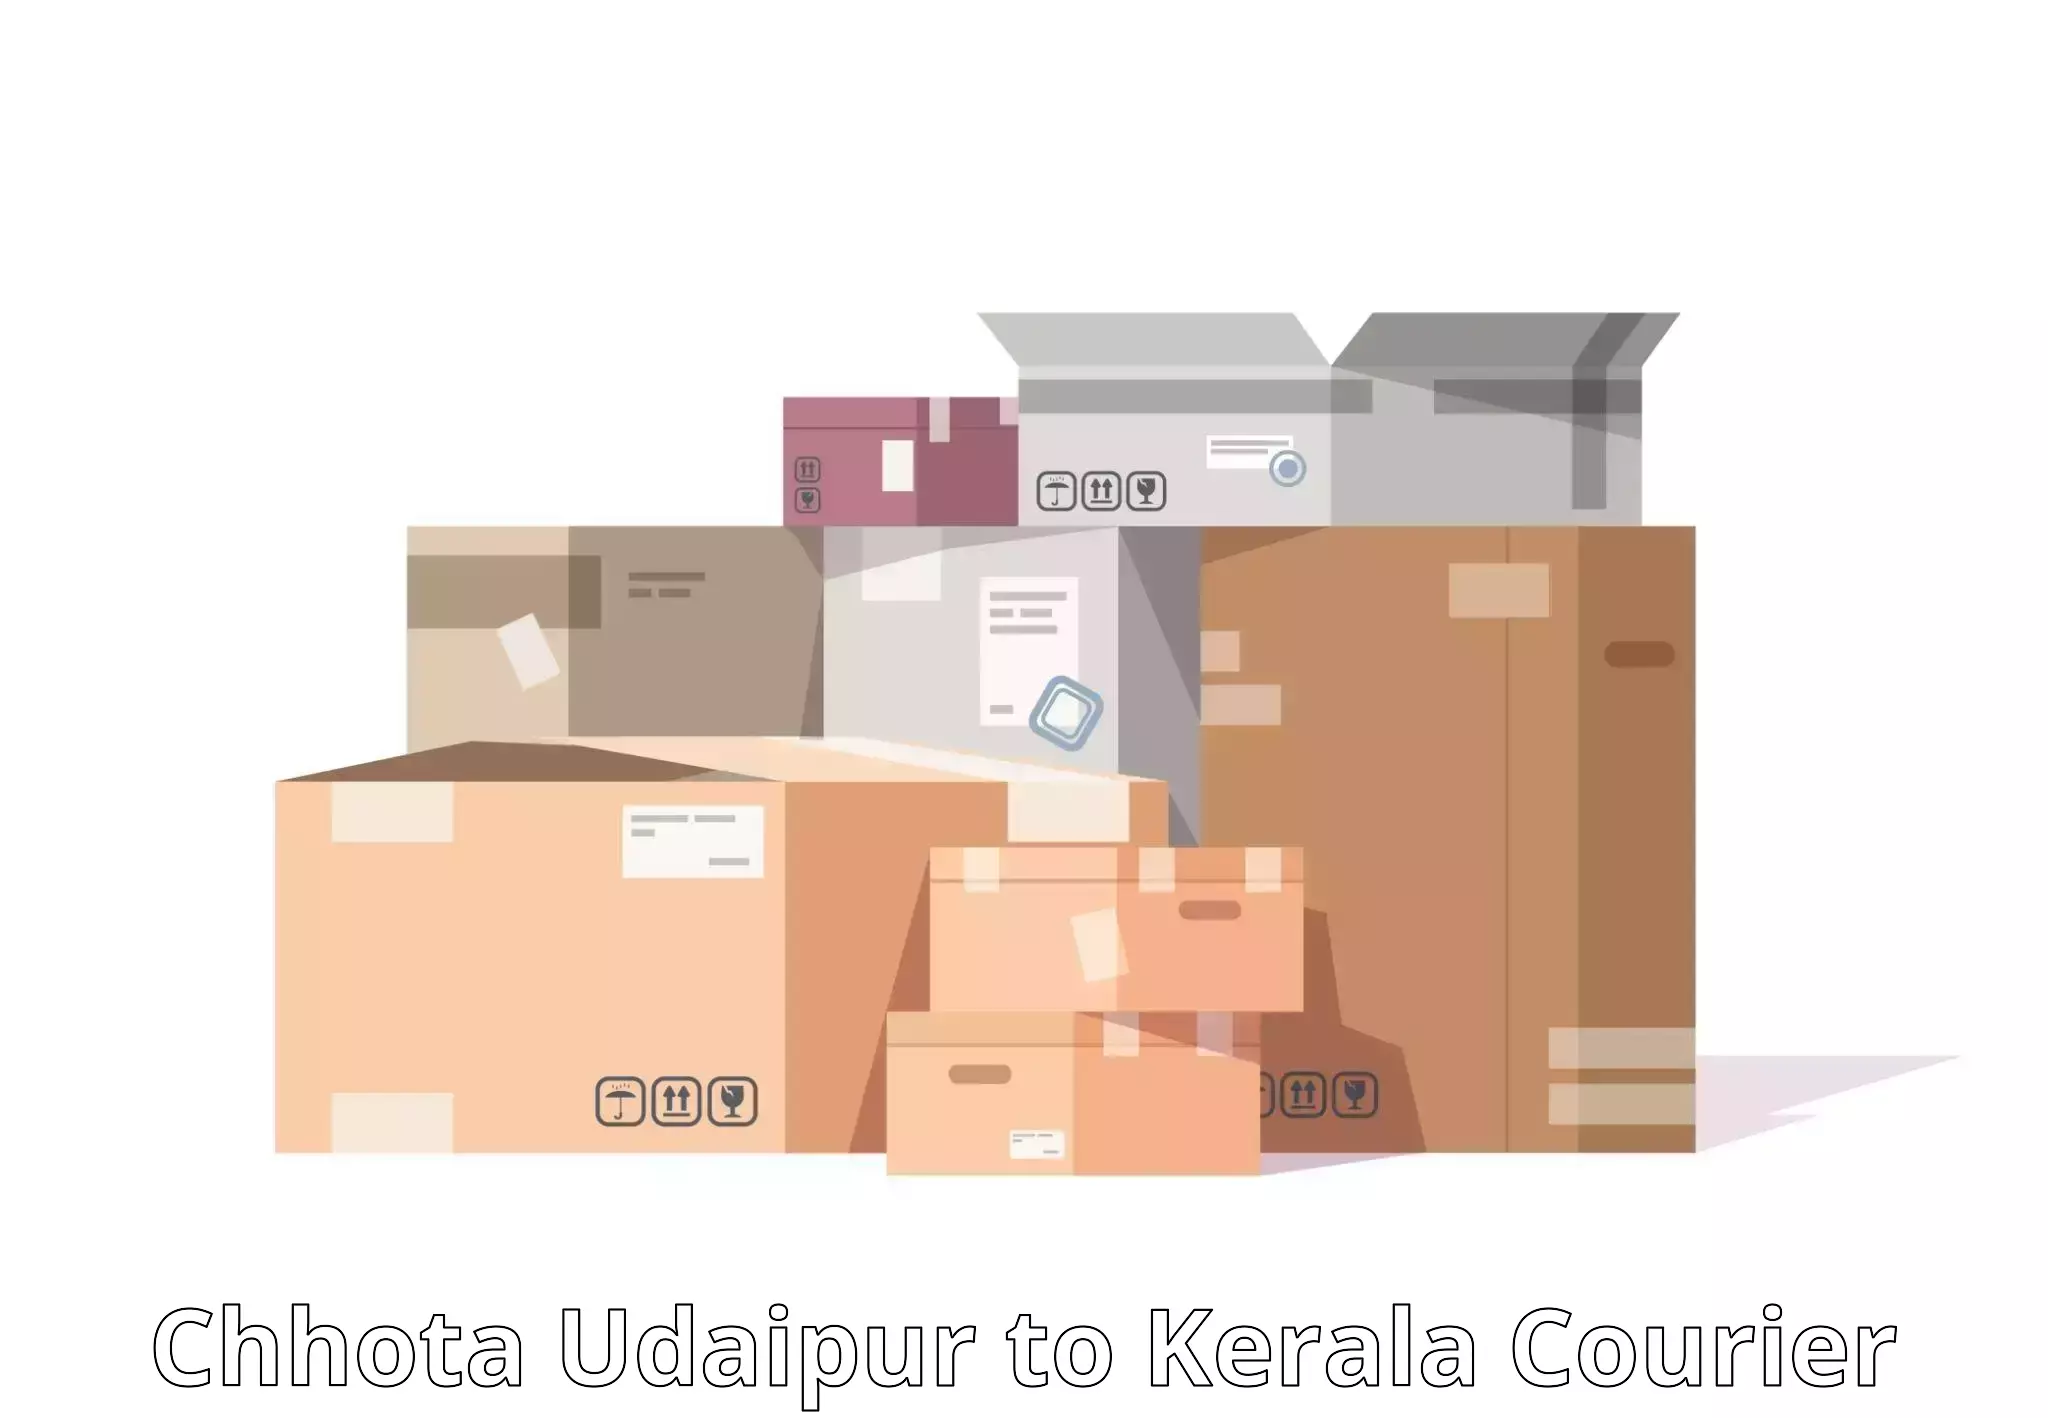 24/7 courier service in Chhota Udaipur to Kerala